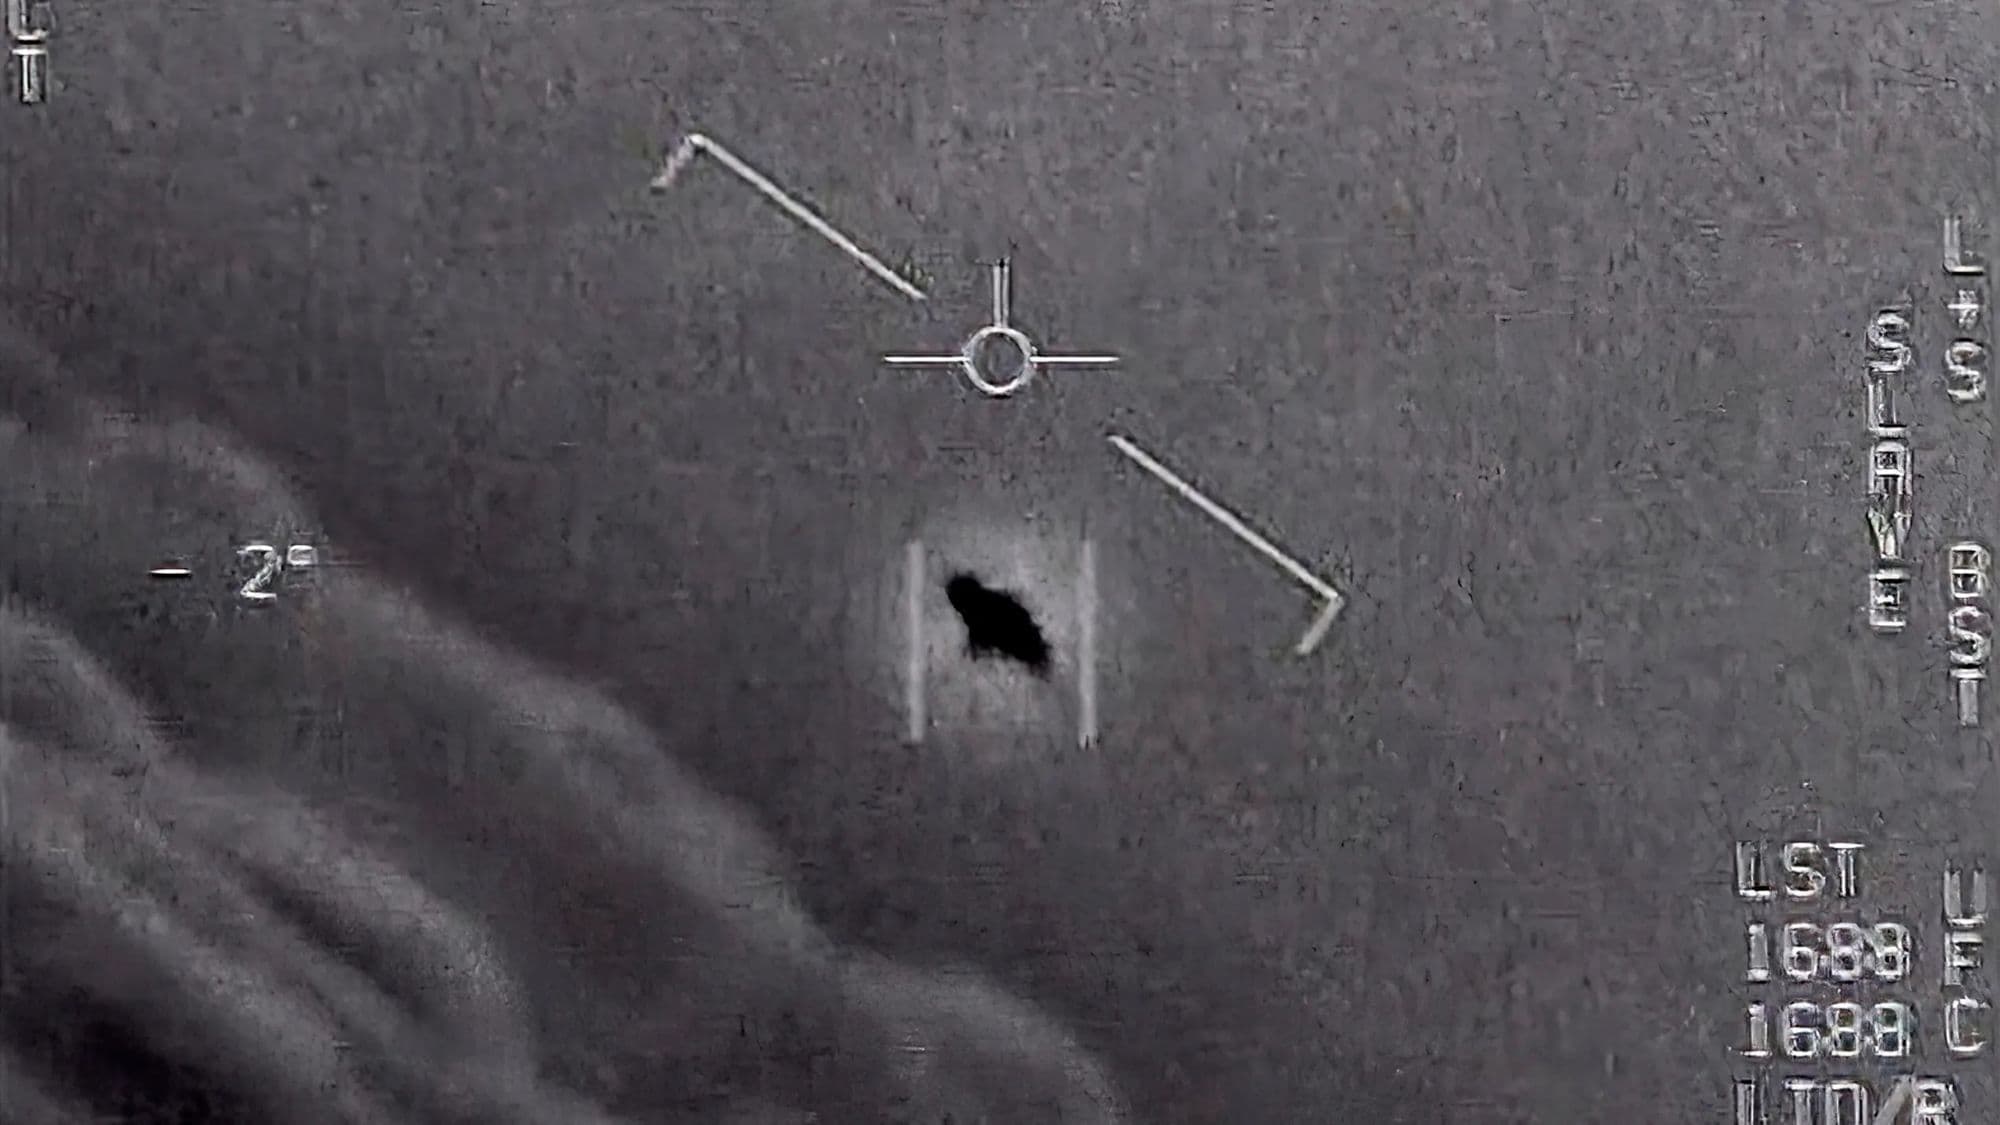 The Reason for the Secrecy of the UFOs Come to Light